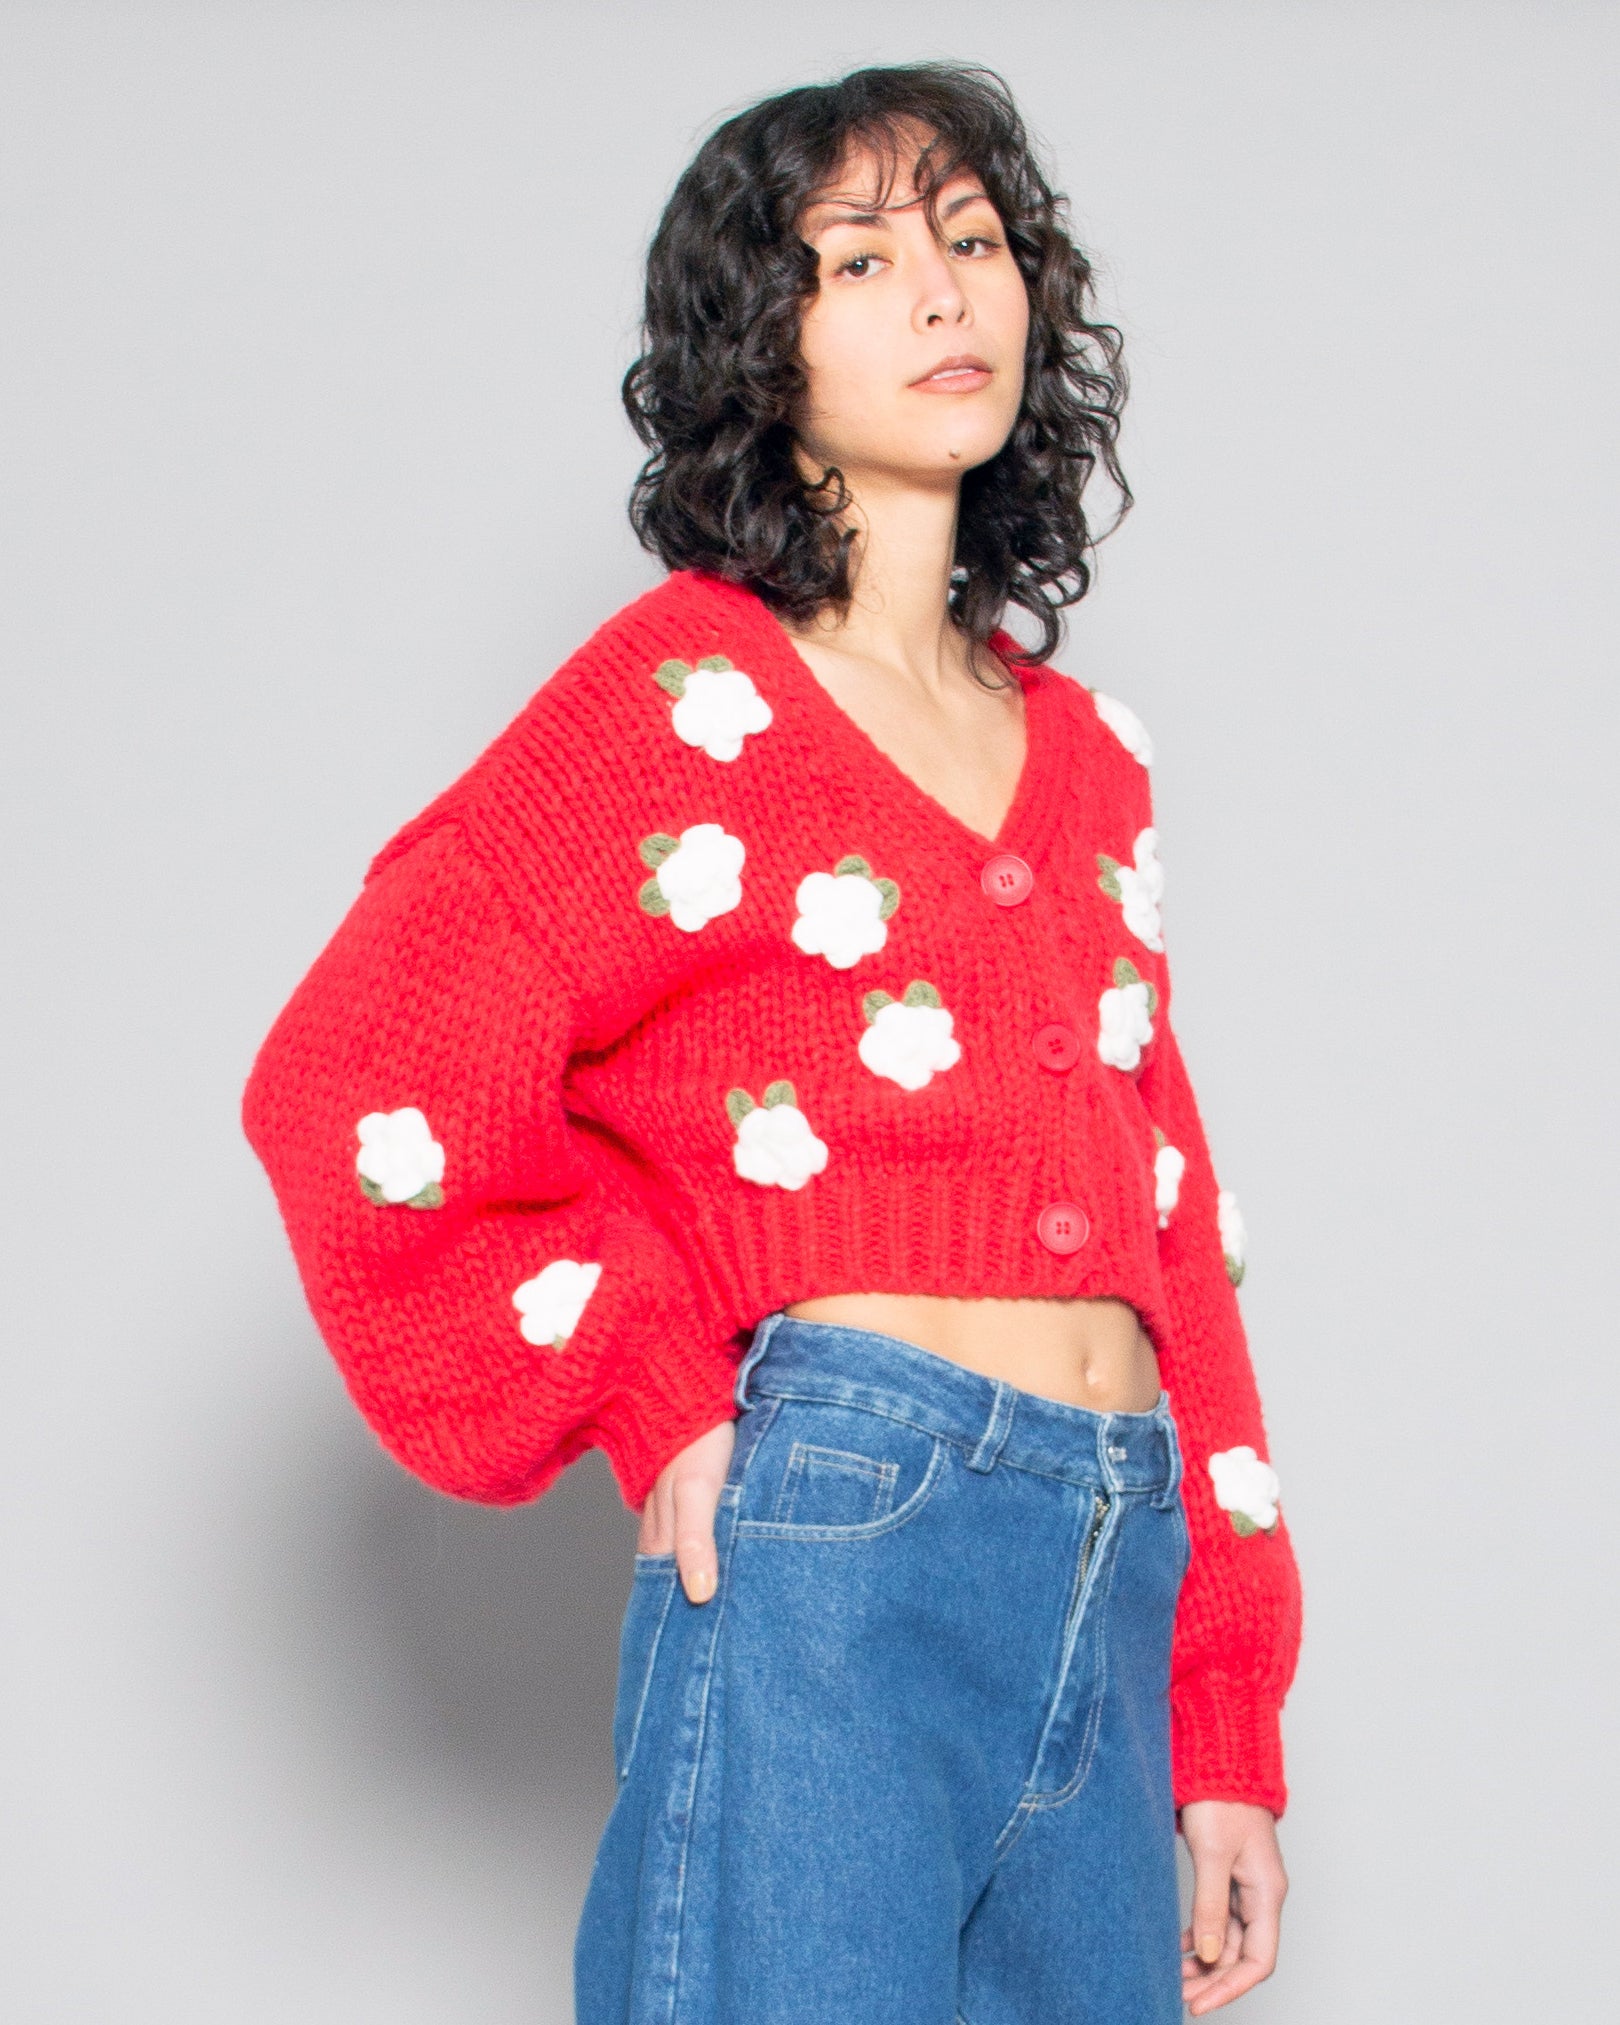 PERSONS Rose Chunky Knit Cardi in Red available at Lahn.shop